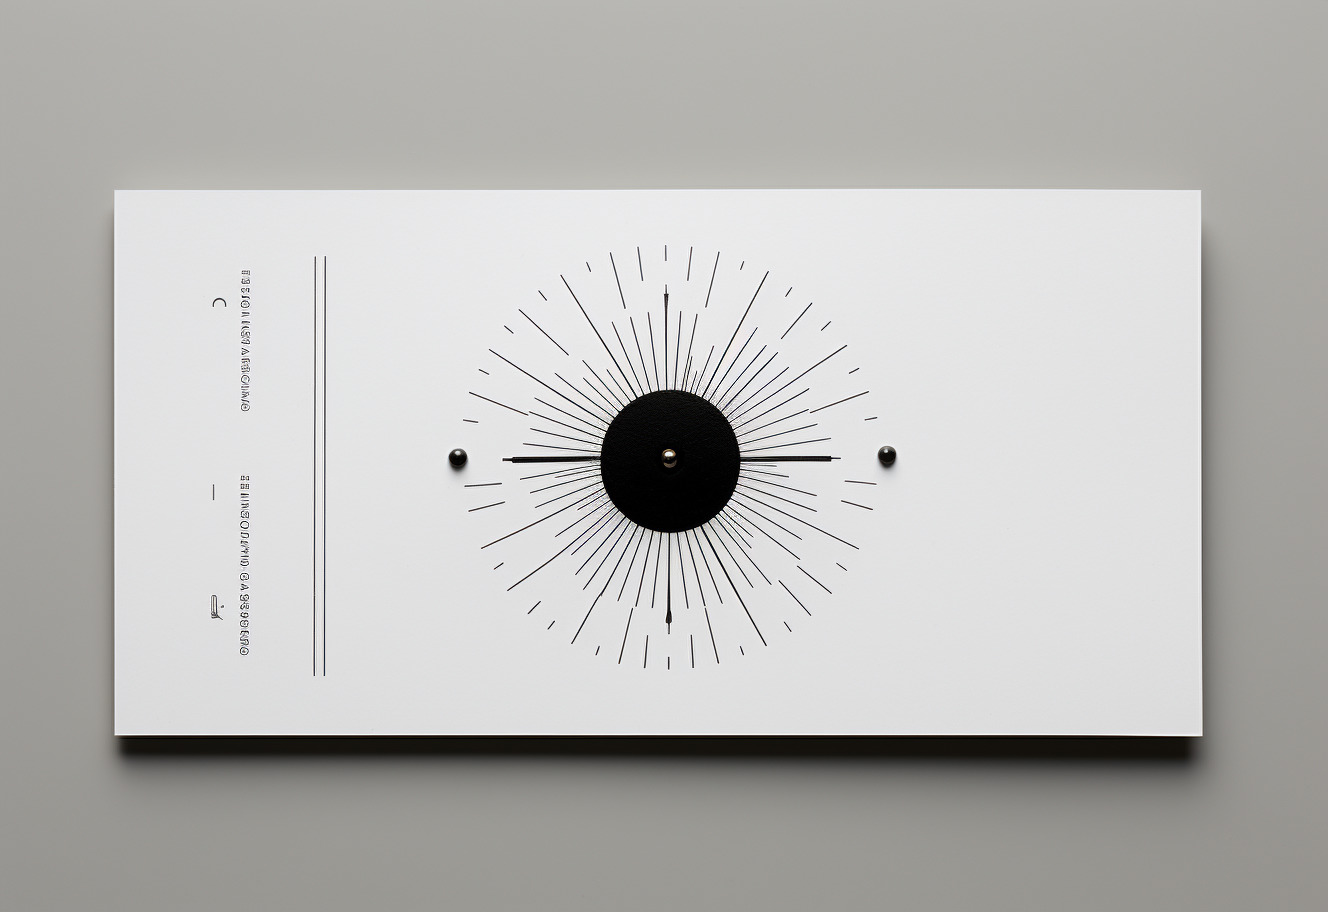 Artistry in Simplicity: 5K Minimal Watch-Themed Business Cards